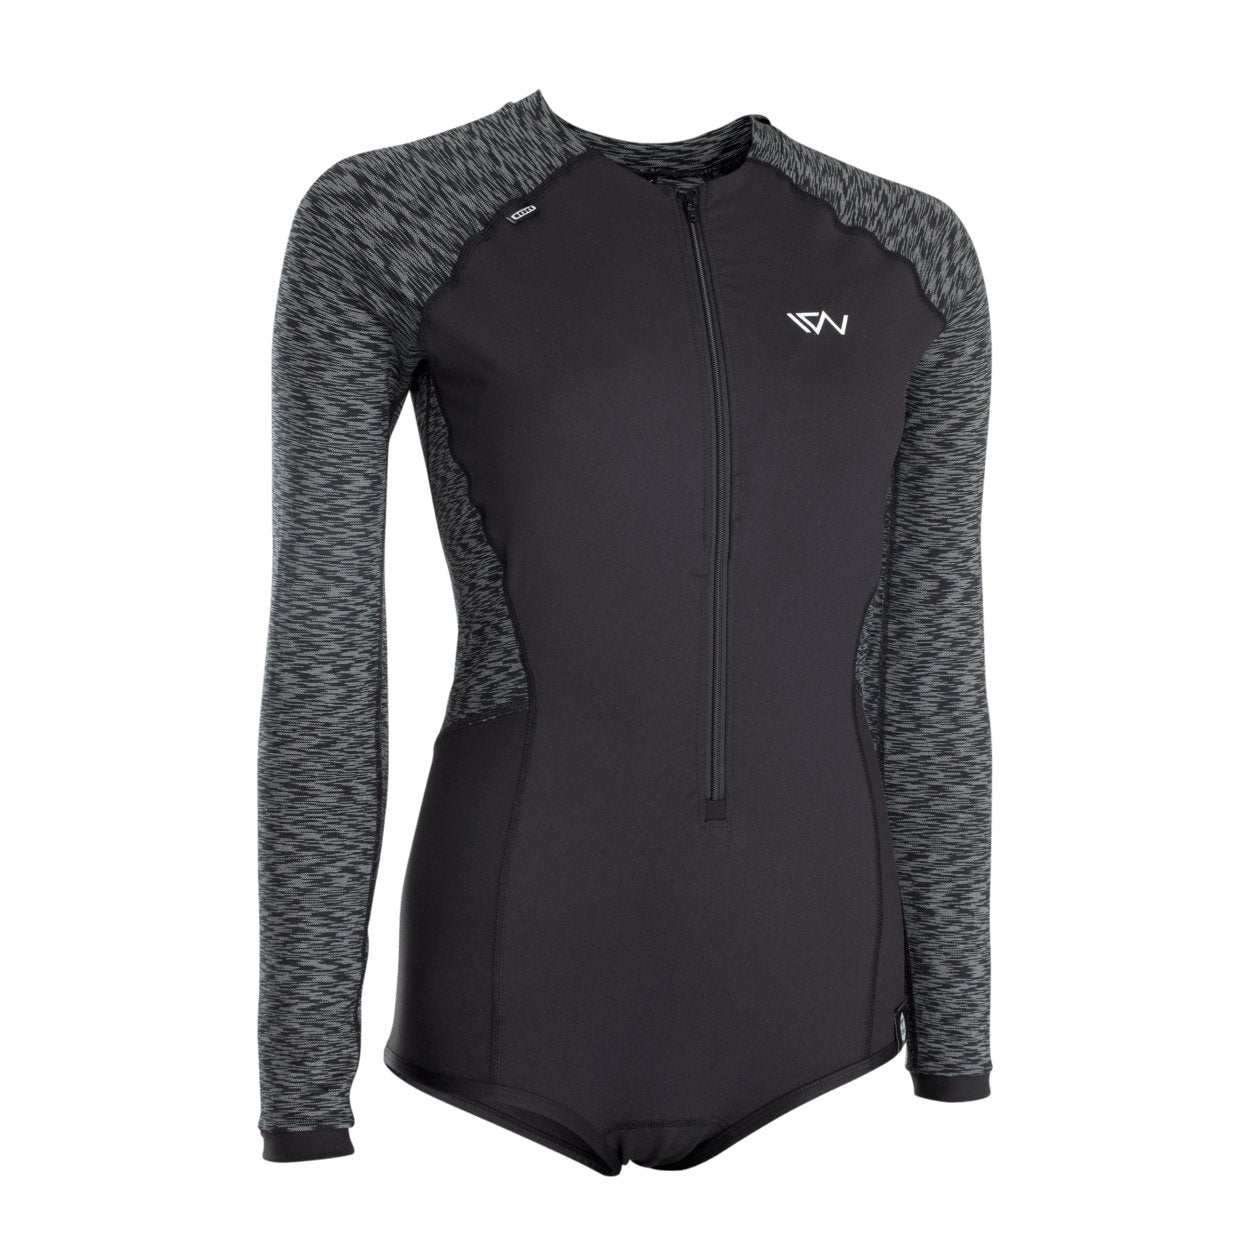 ION Muse Swimsuit LS 2020 - Worthing Watersports - 9008415887132 - Tops - ION Water